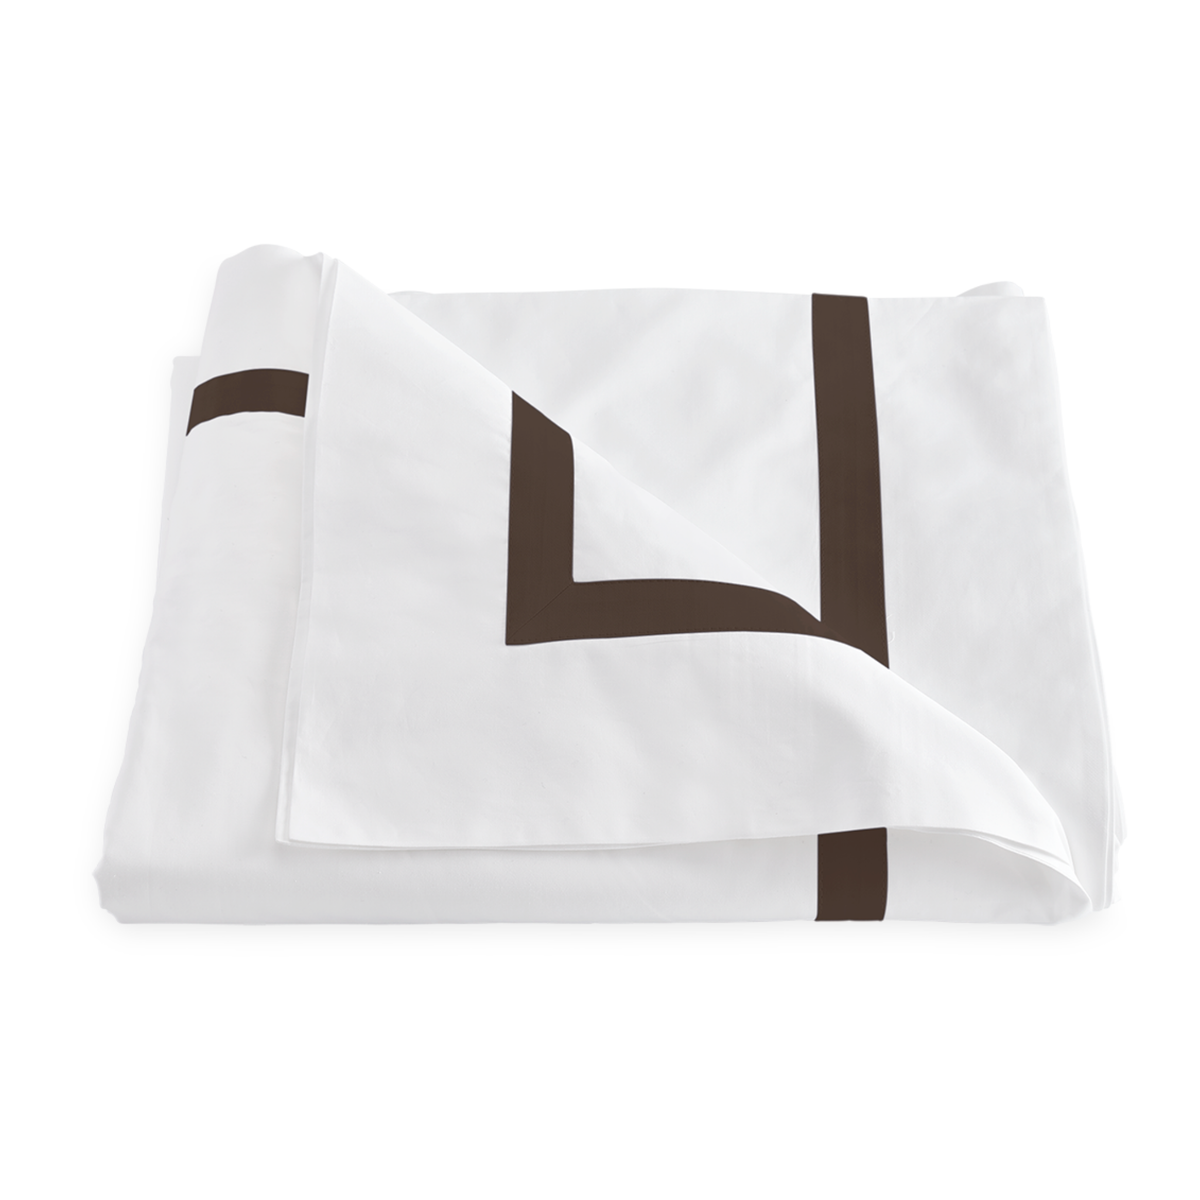 Duvet Cover of Matouk Lowell Bedding Pillowcases in Sable Color